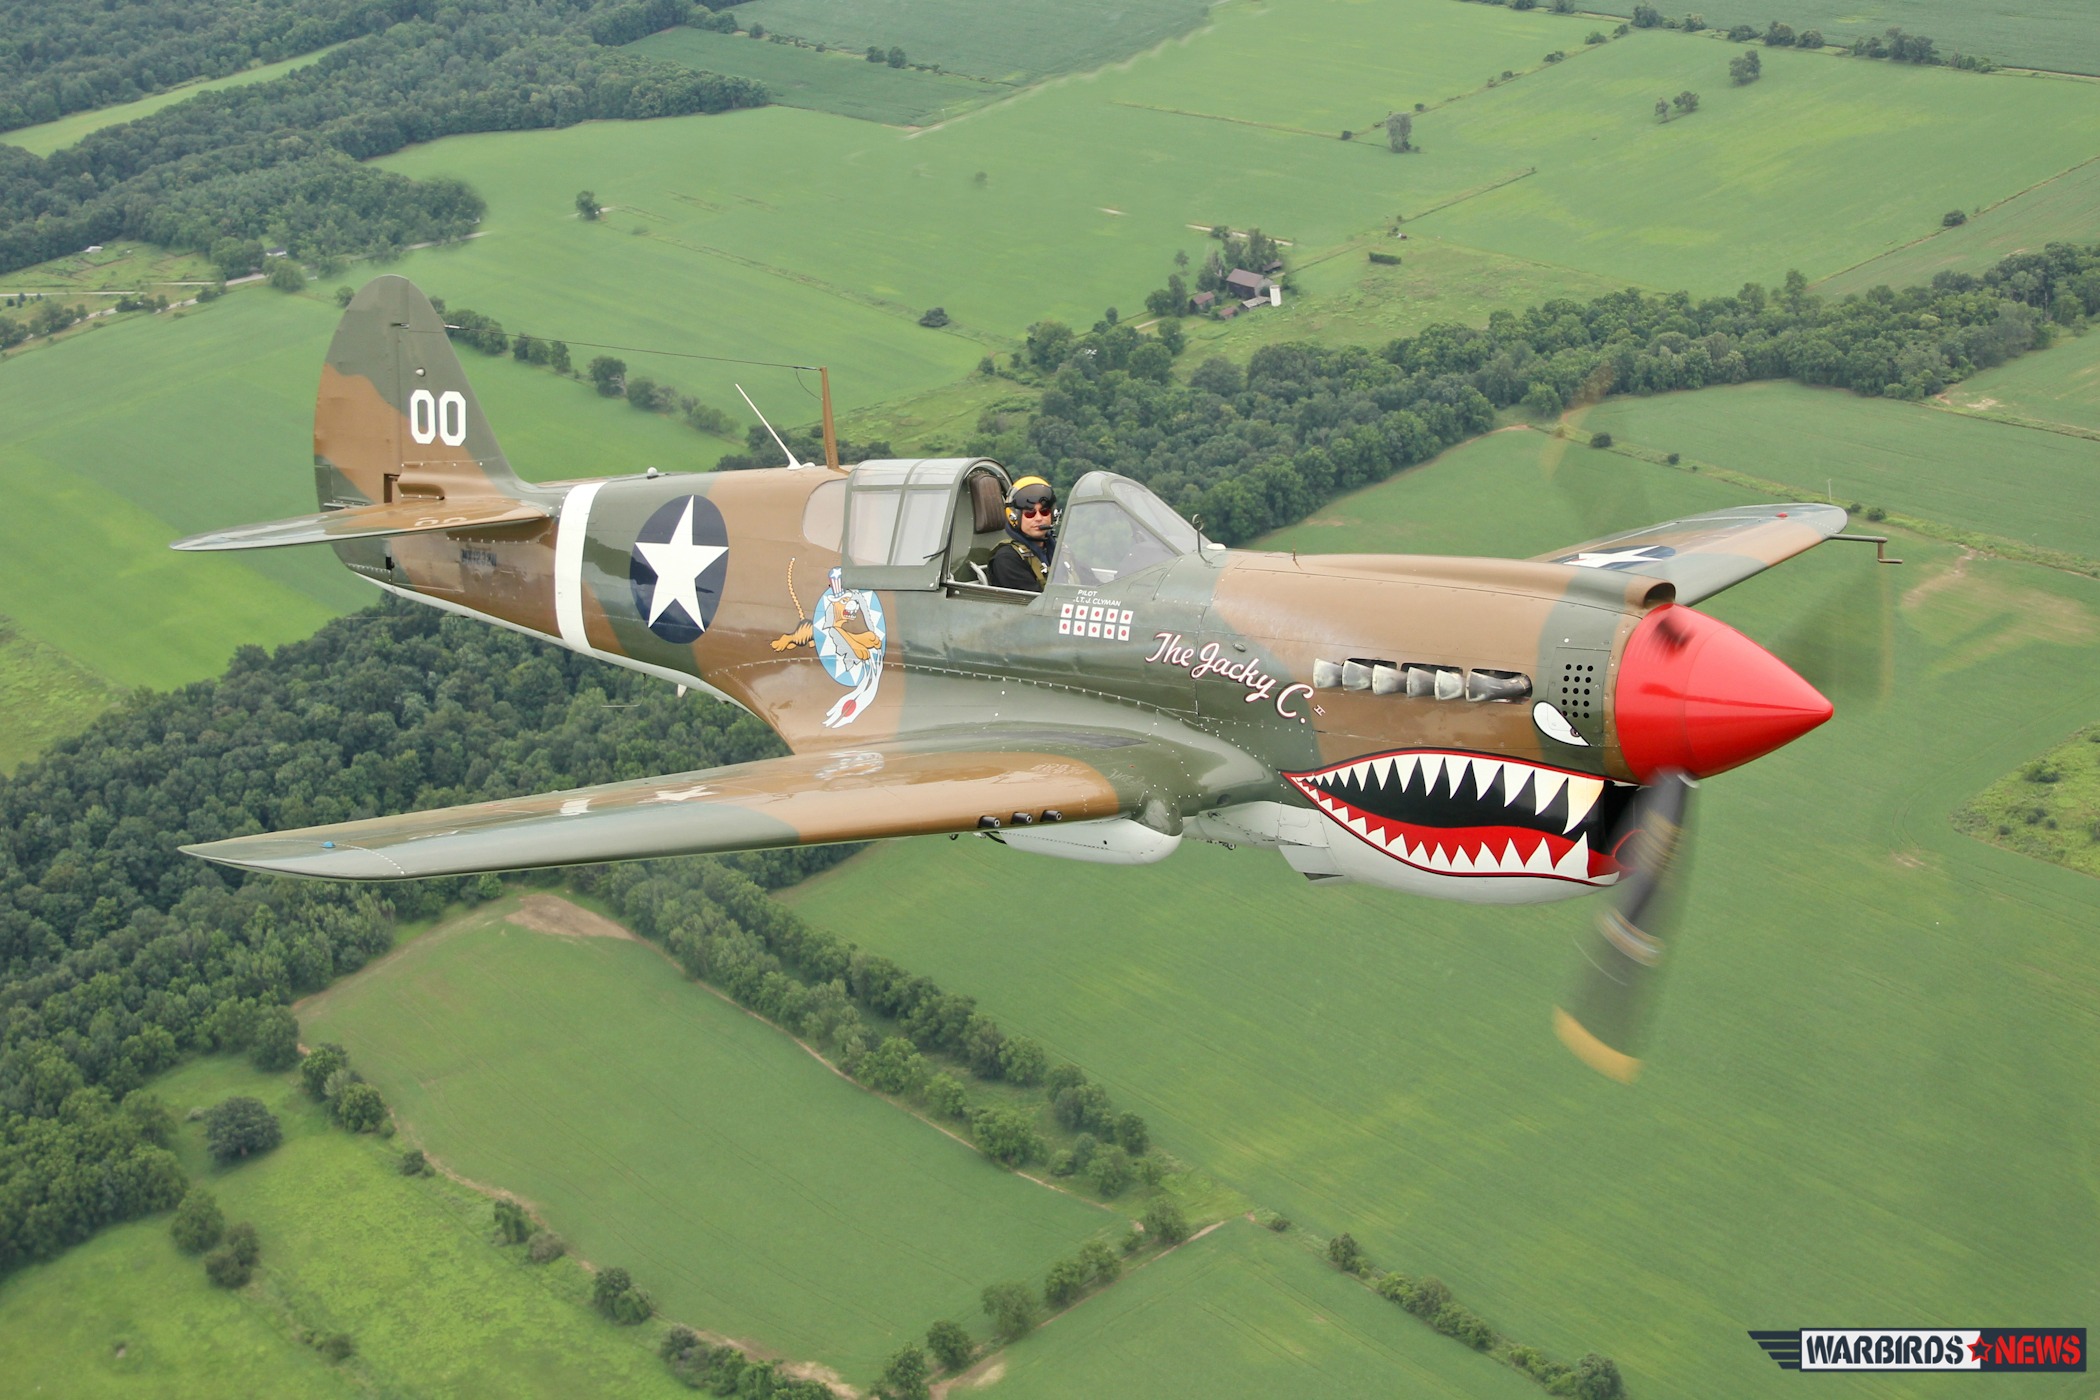 Air-toAir shot of the Curtiss P-40 Warhawk "Jacky C" operated by the American Airpower Museum